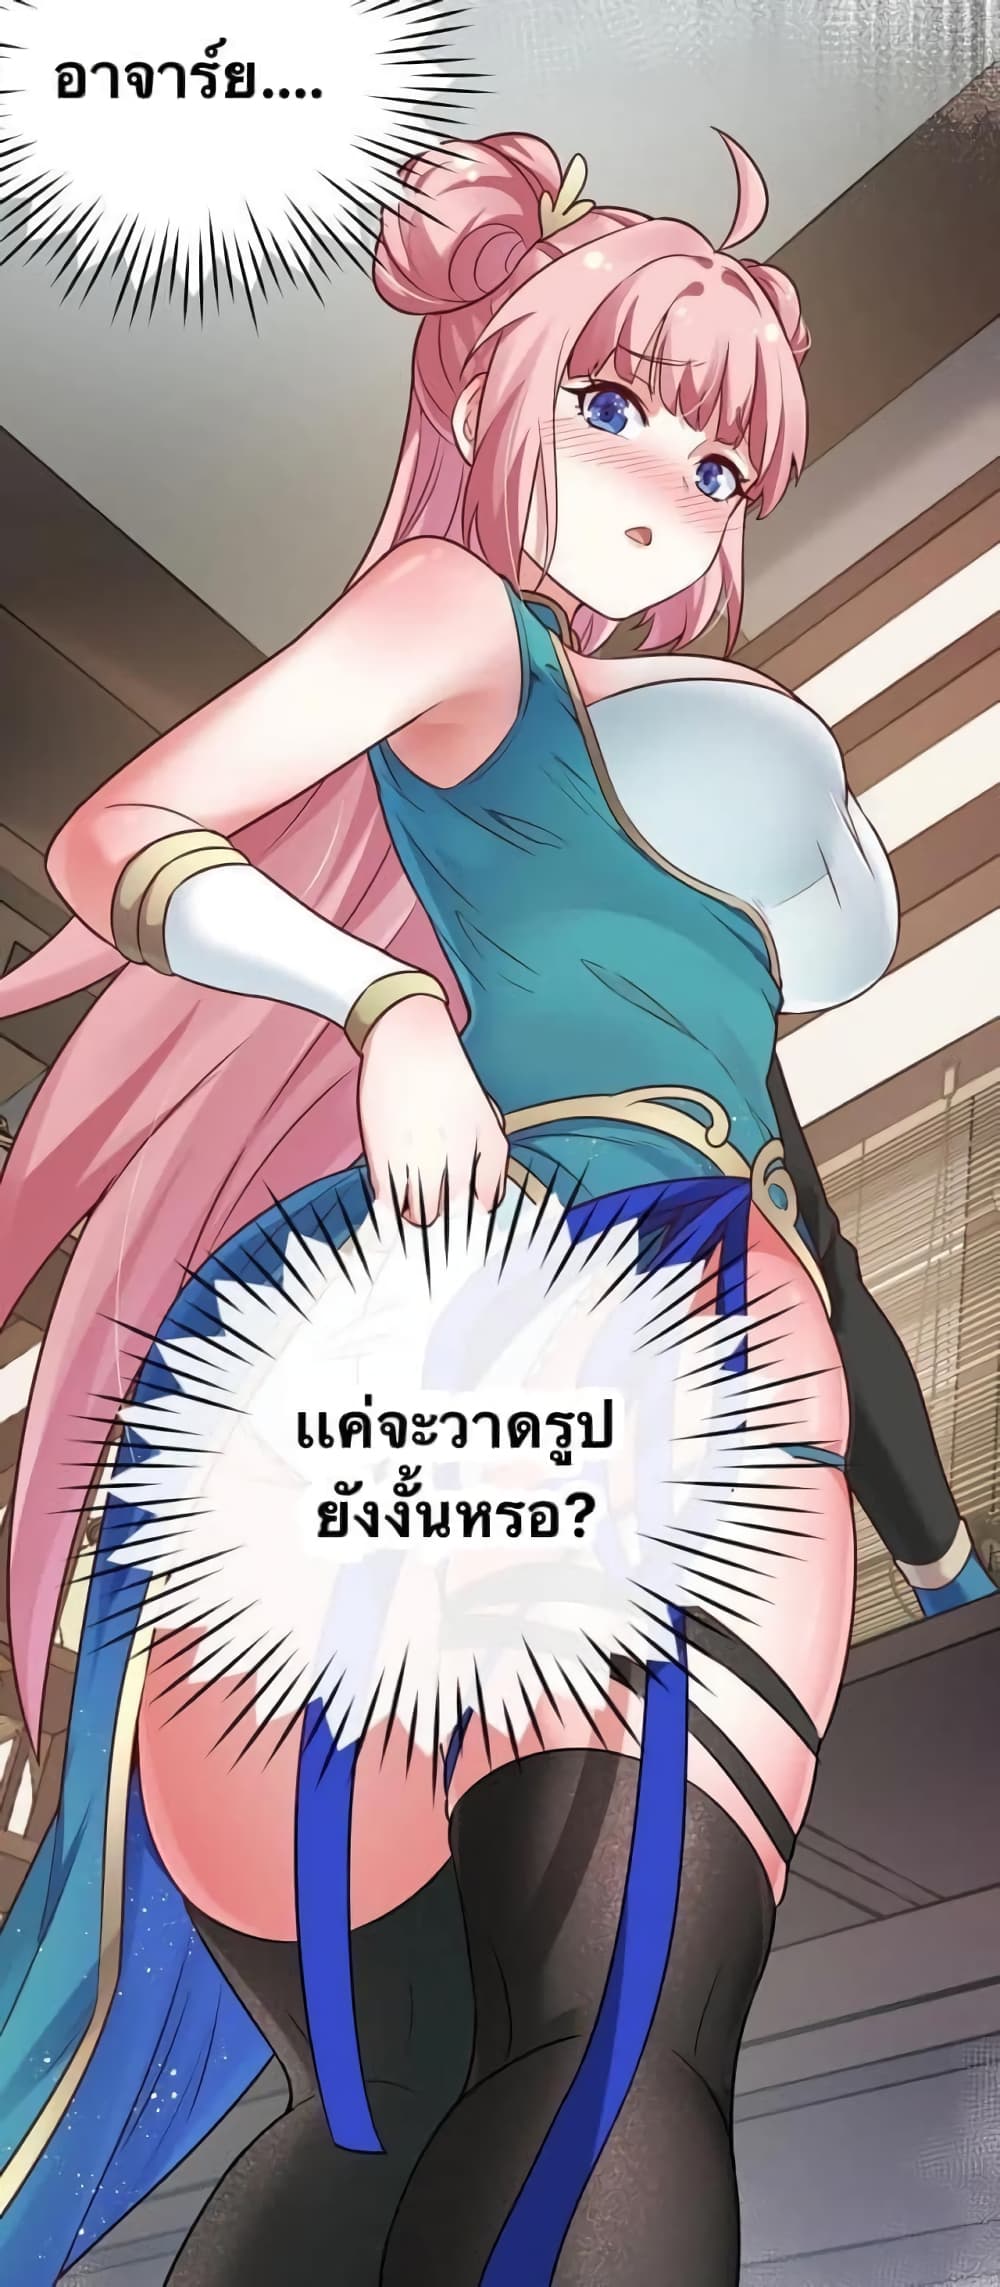 Godsian Masian from Another World 7 แปลไทย